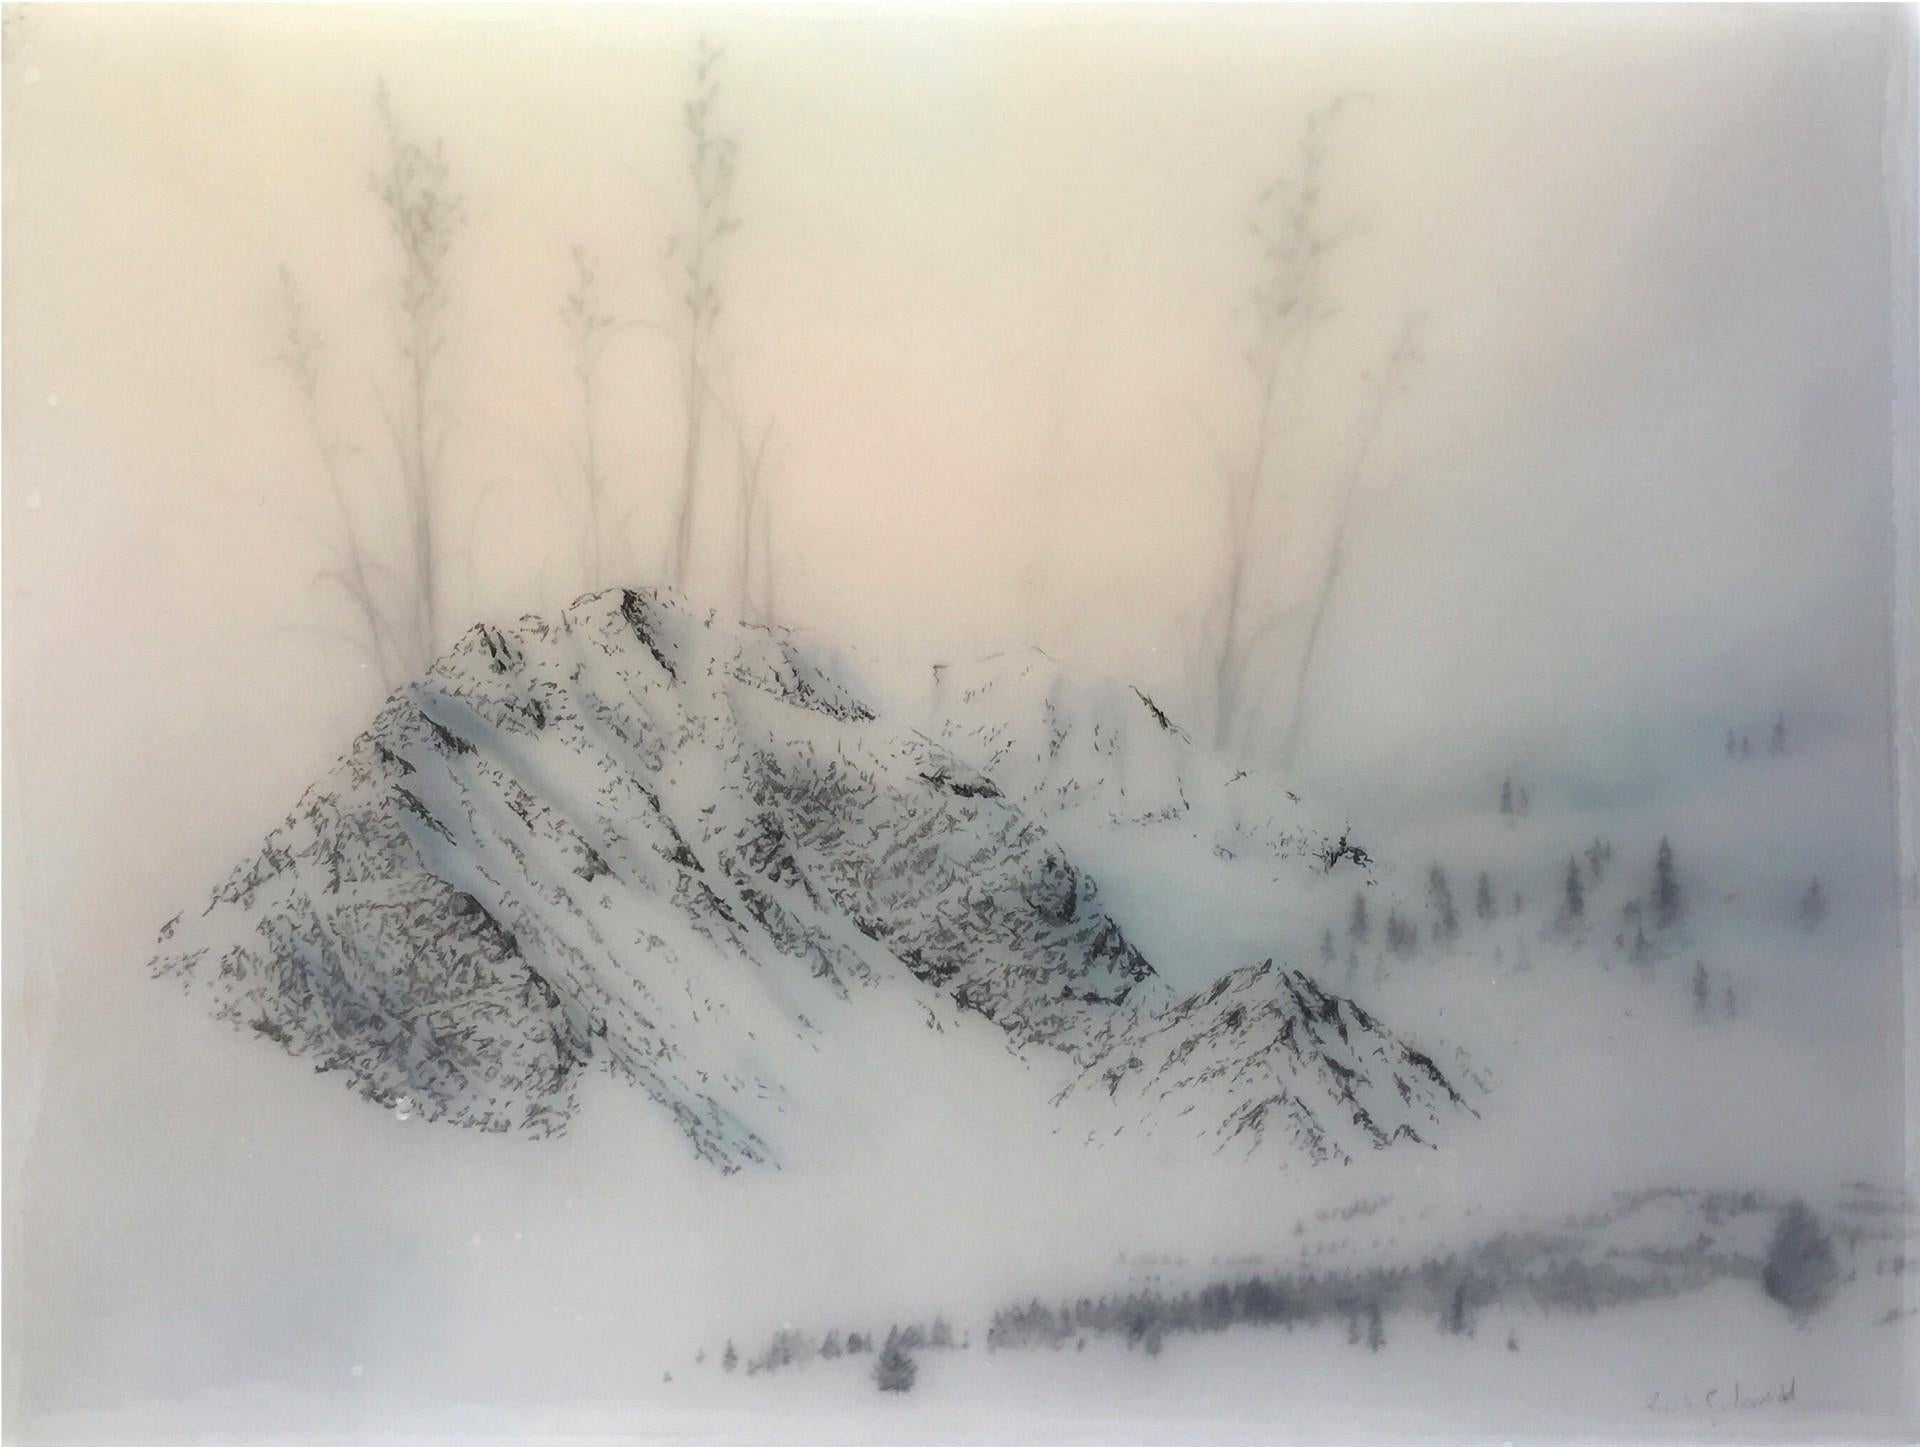 Long Grass and Blue Mountain - Art by Brooks Salzwedel